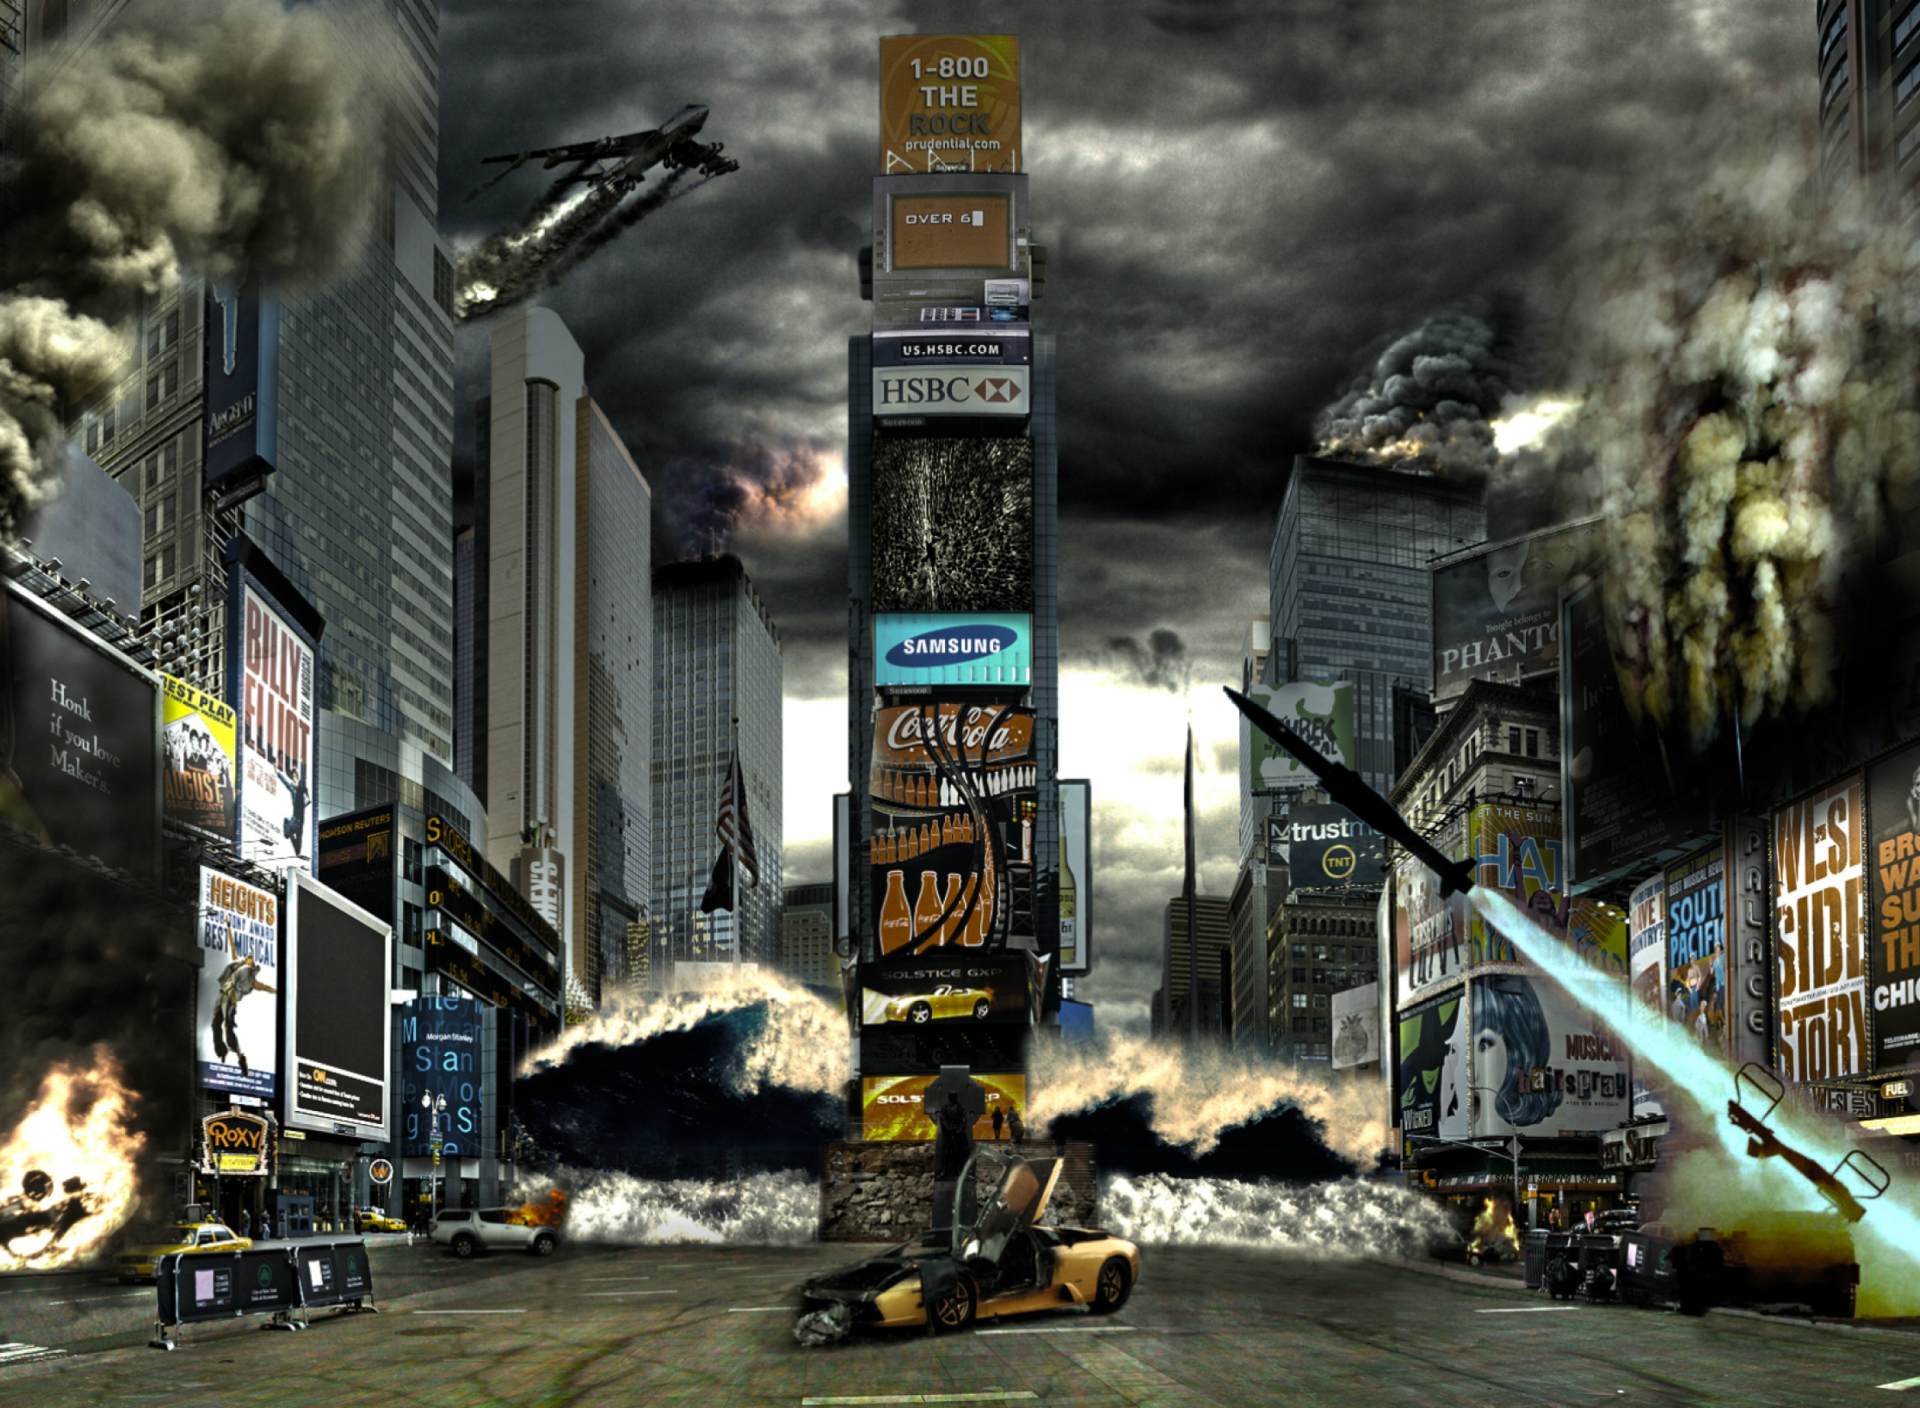 Times Square Disaster wallpaper 1920x1408